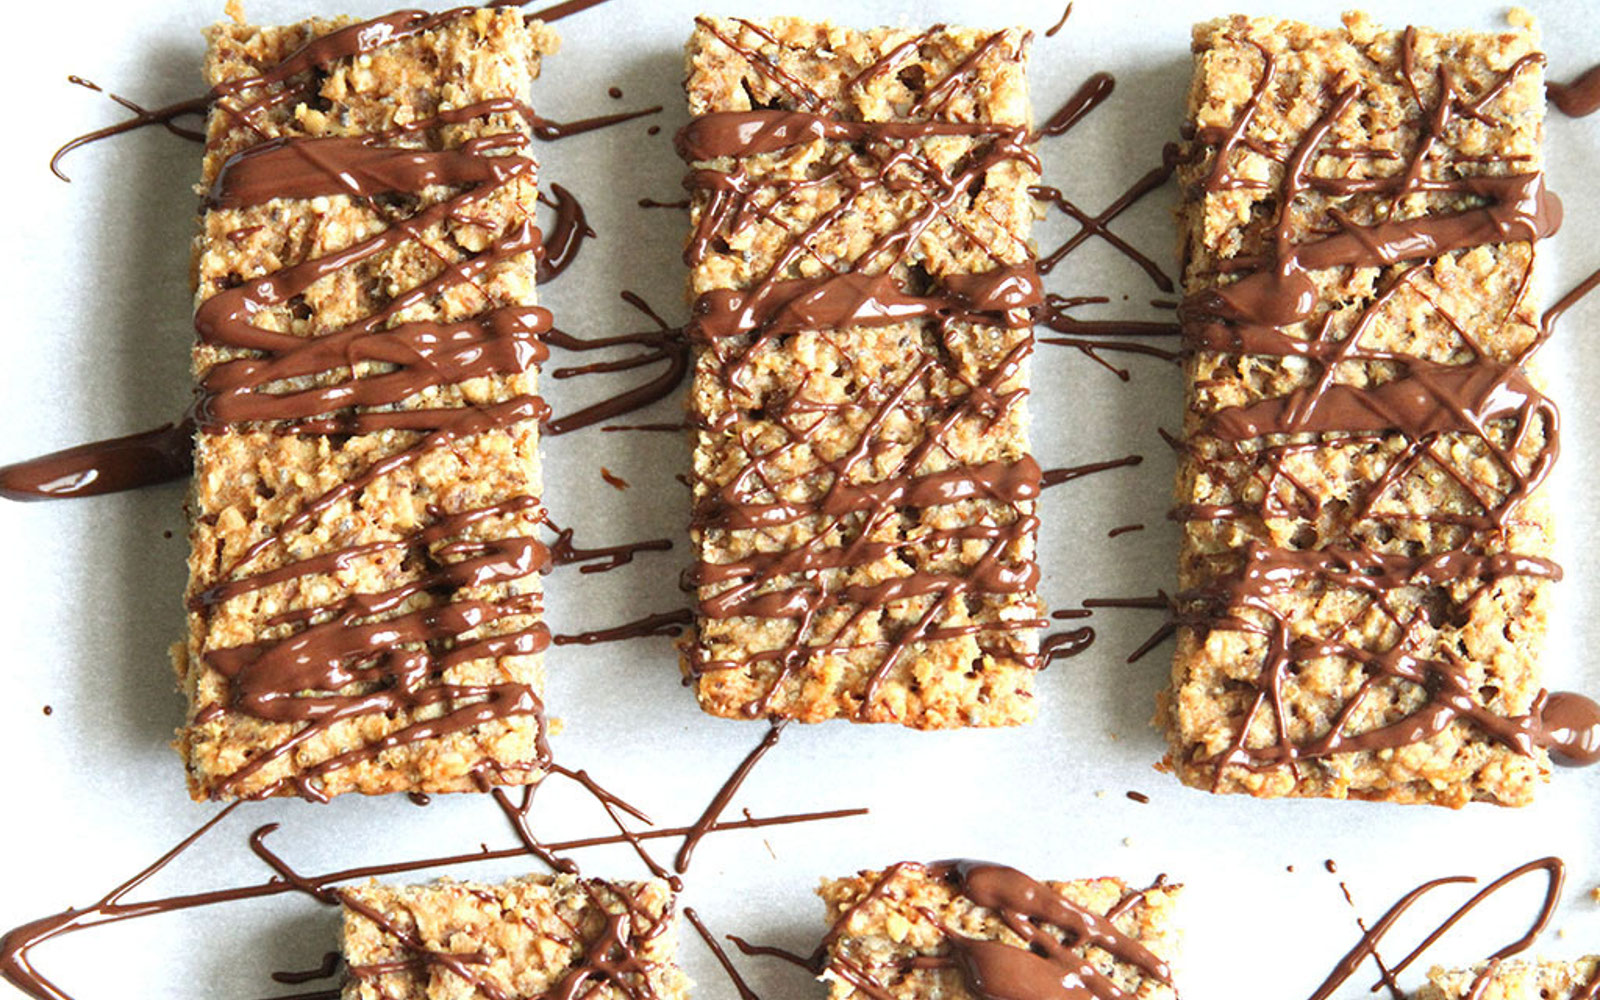 Peanut Butter And Banana Protein Bars Vegan One Green Planet,Etiquette Rules For Email